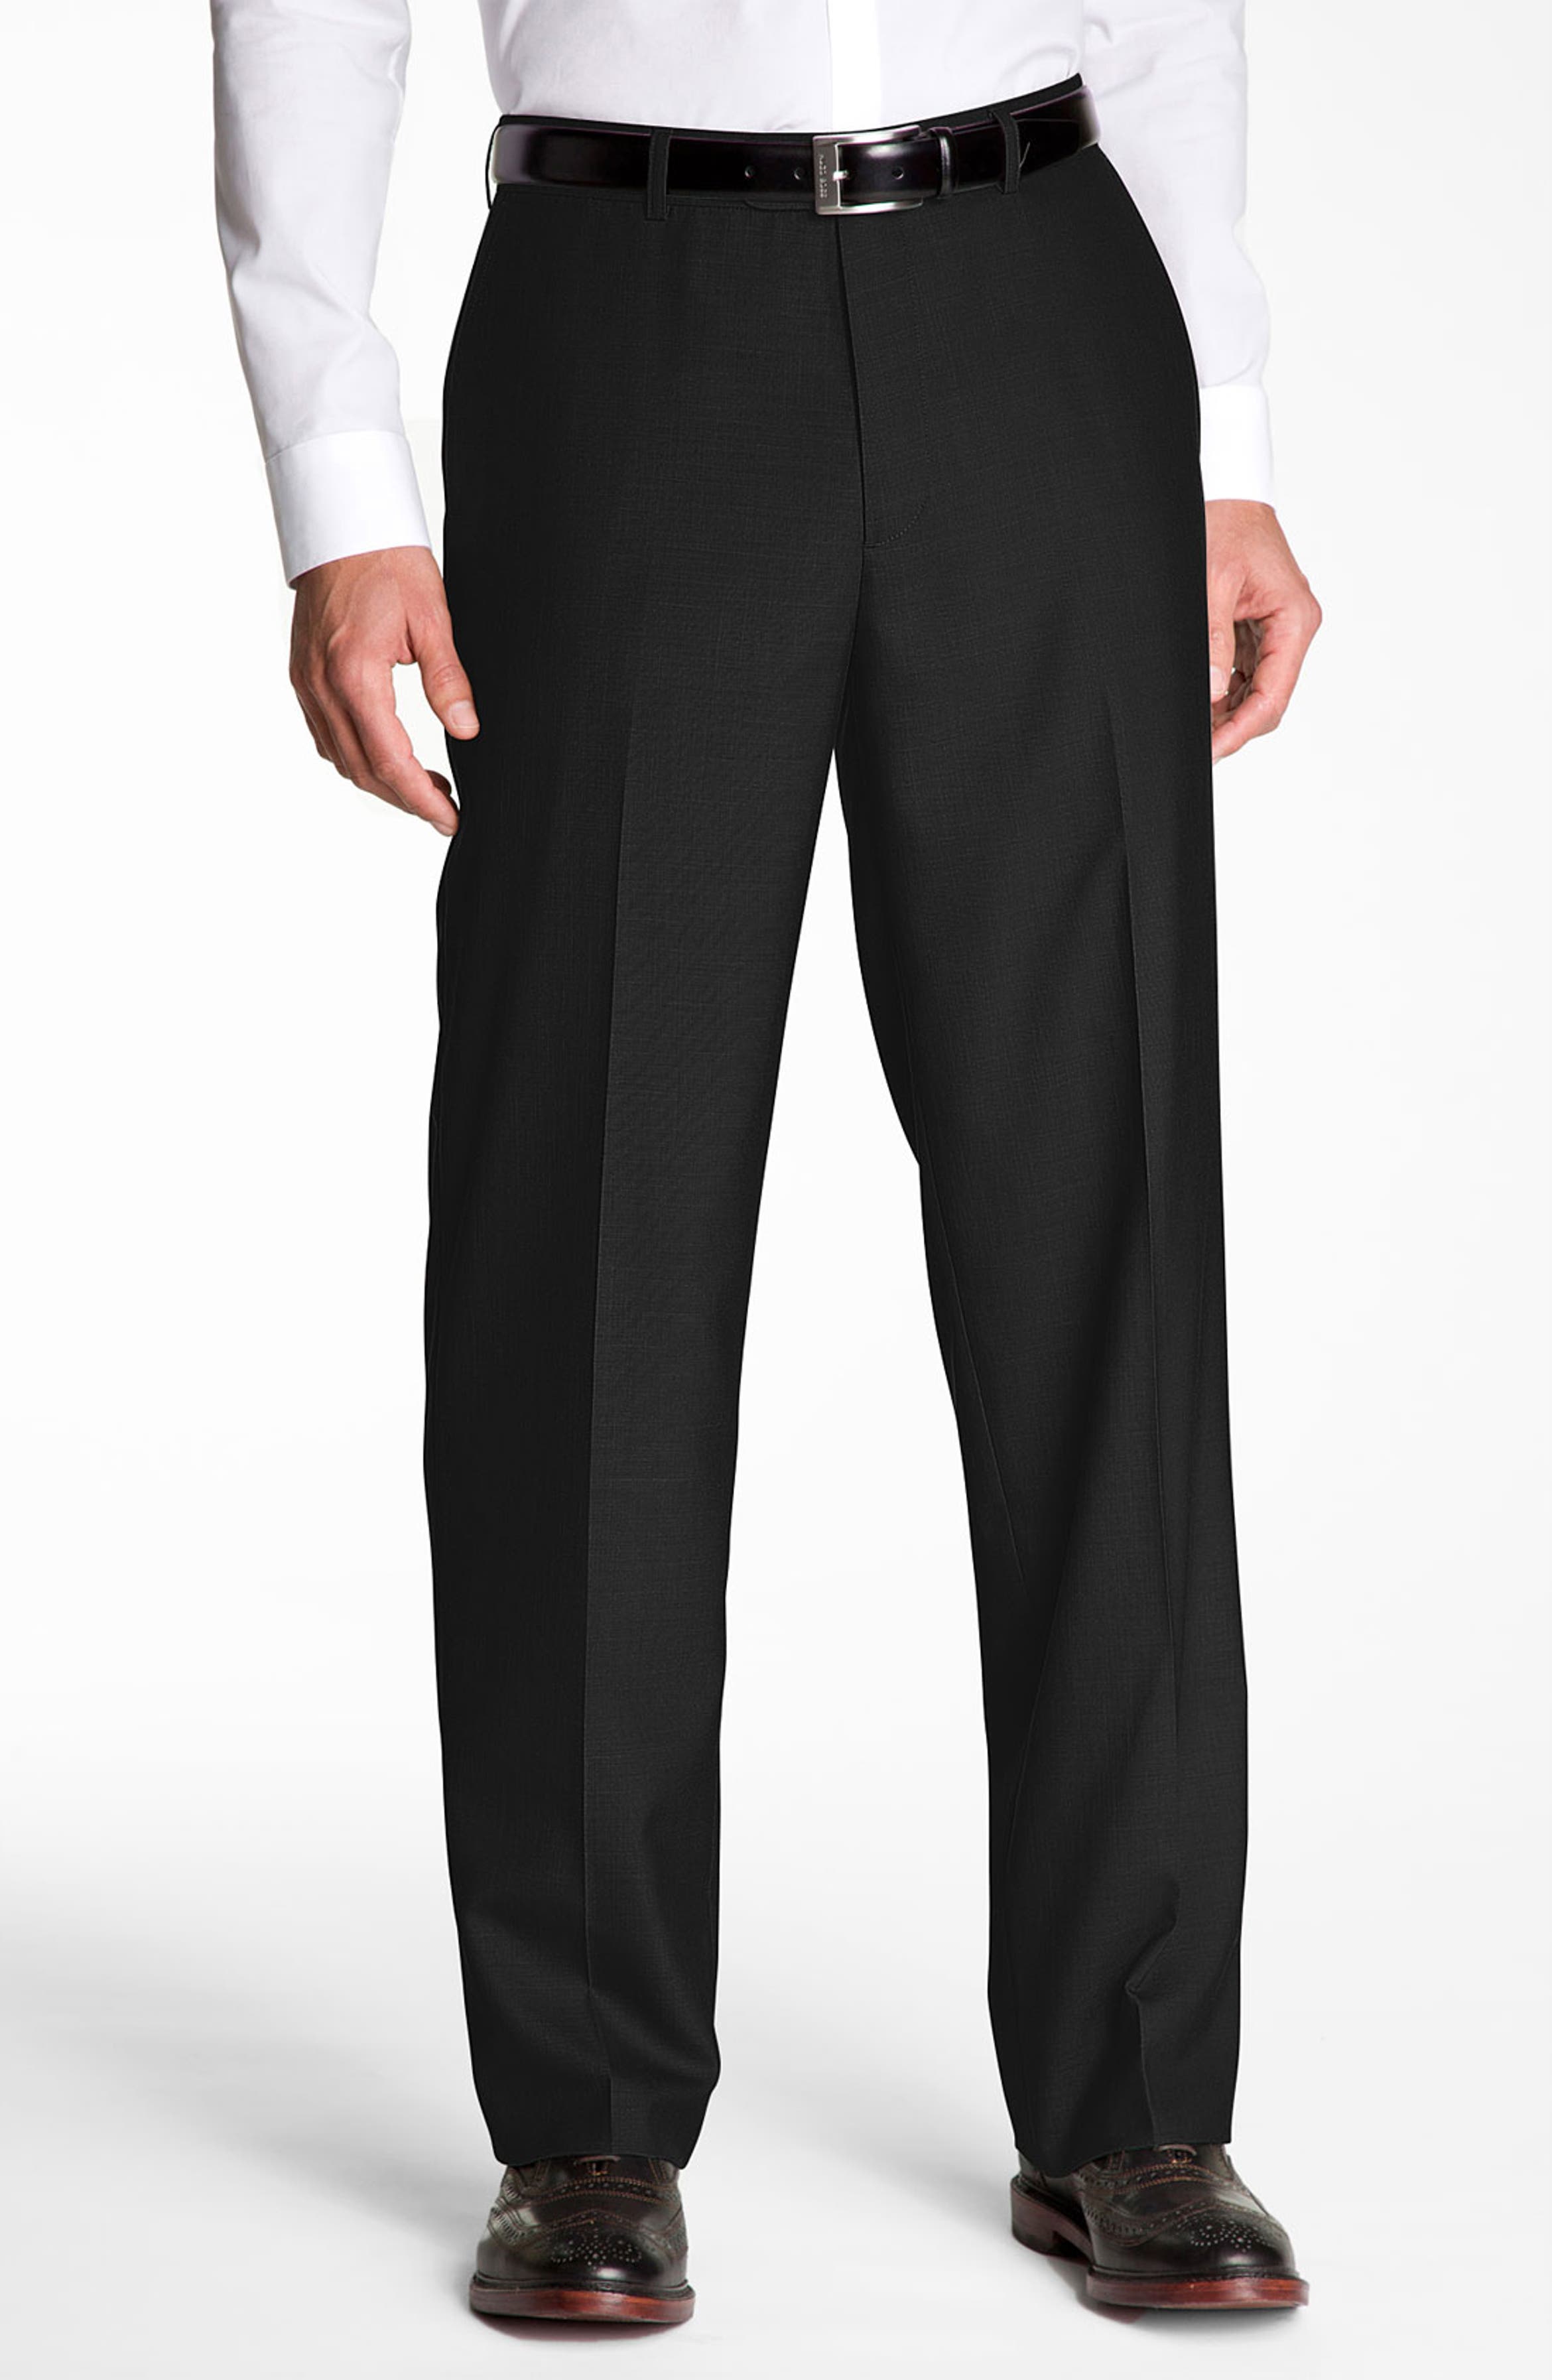 Linea Naturale 'Wear Now Work Now' Microfiber Trousers | Nordstrom